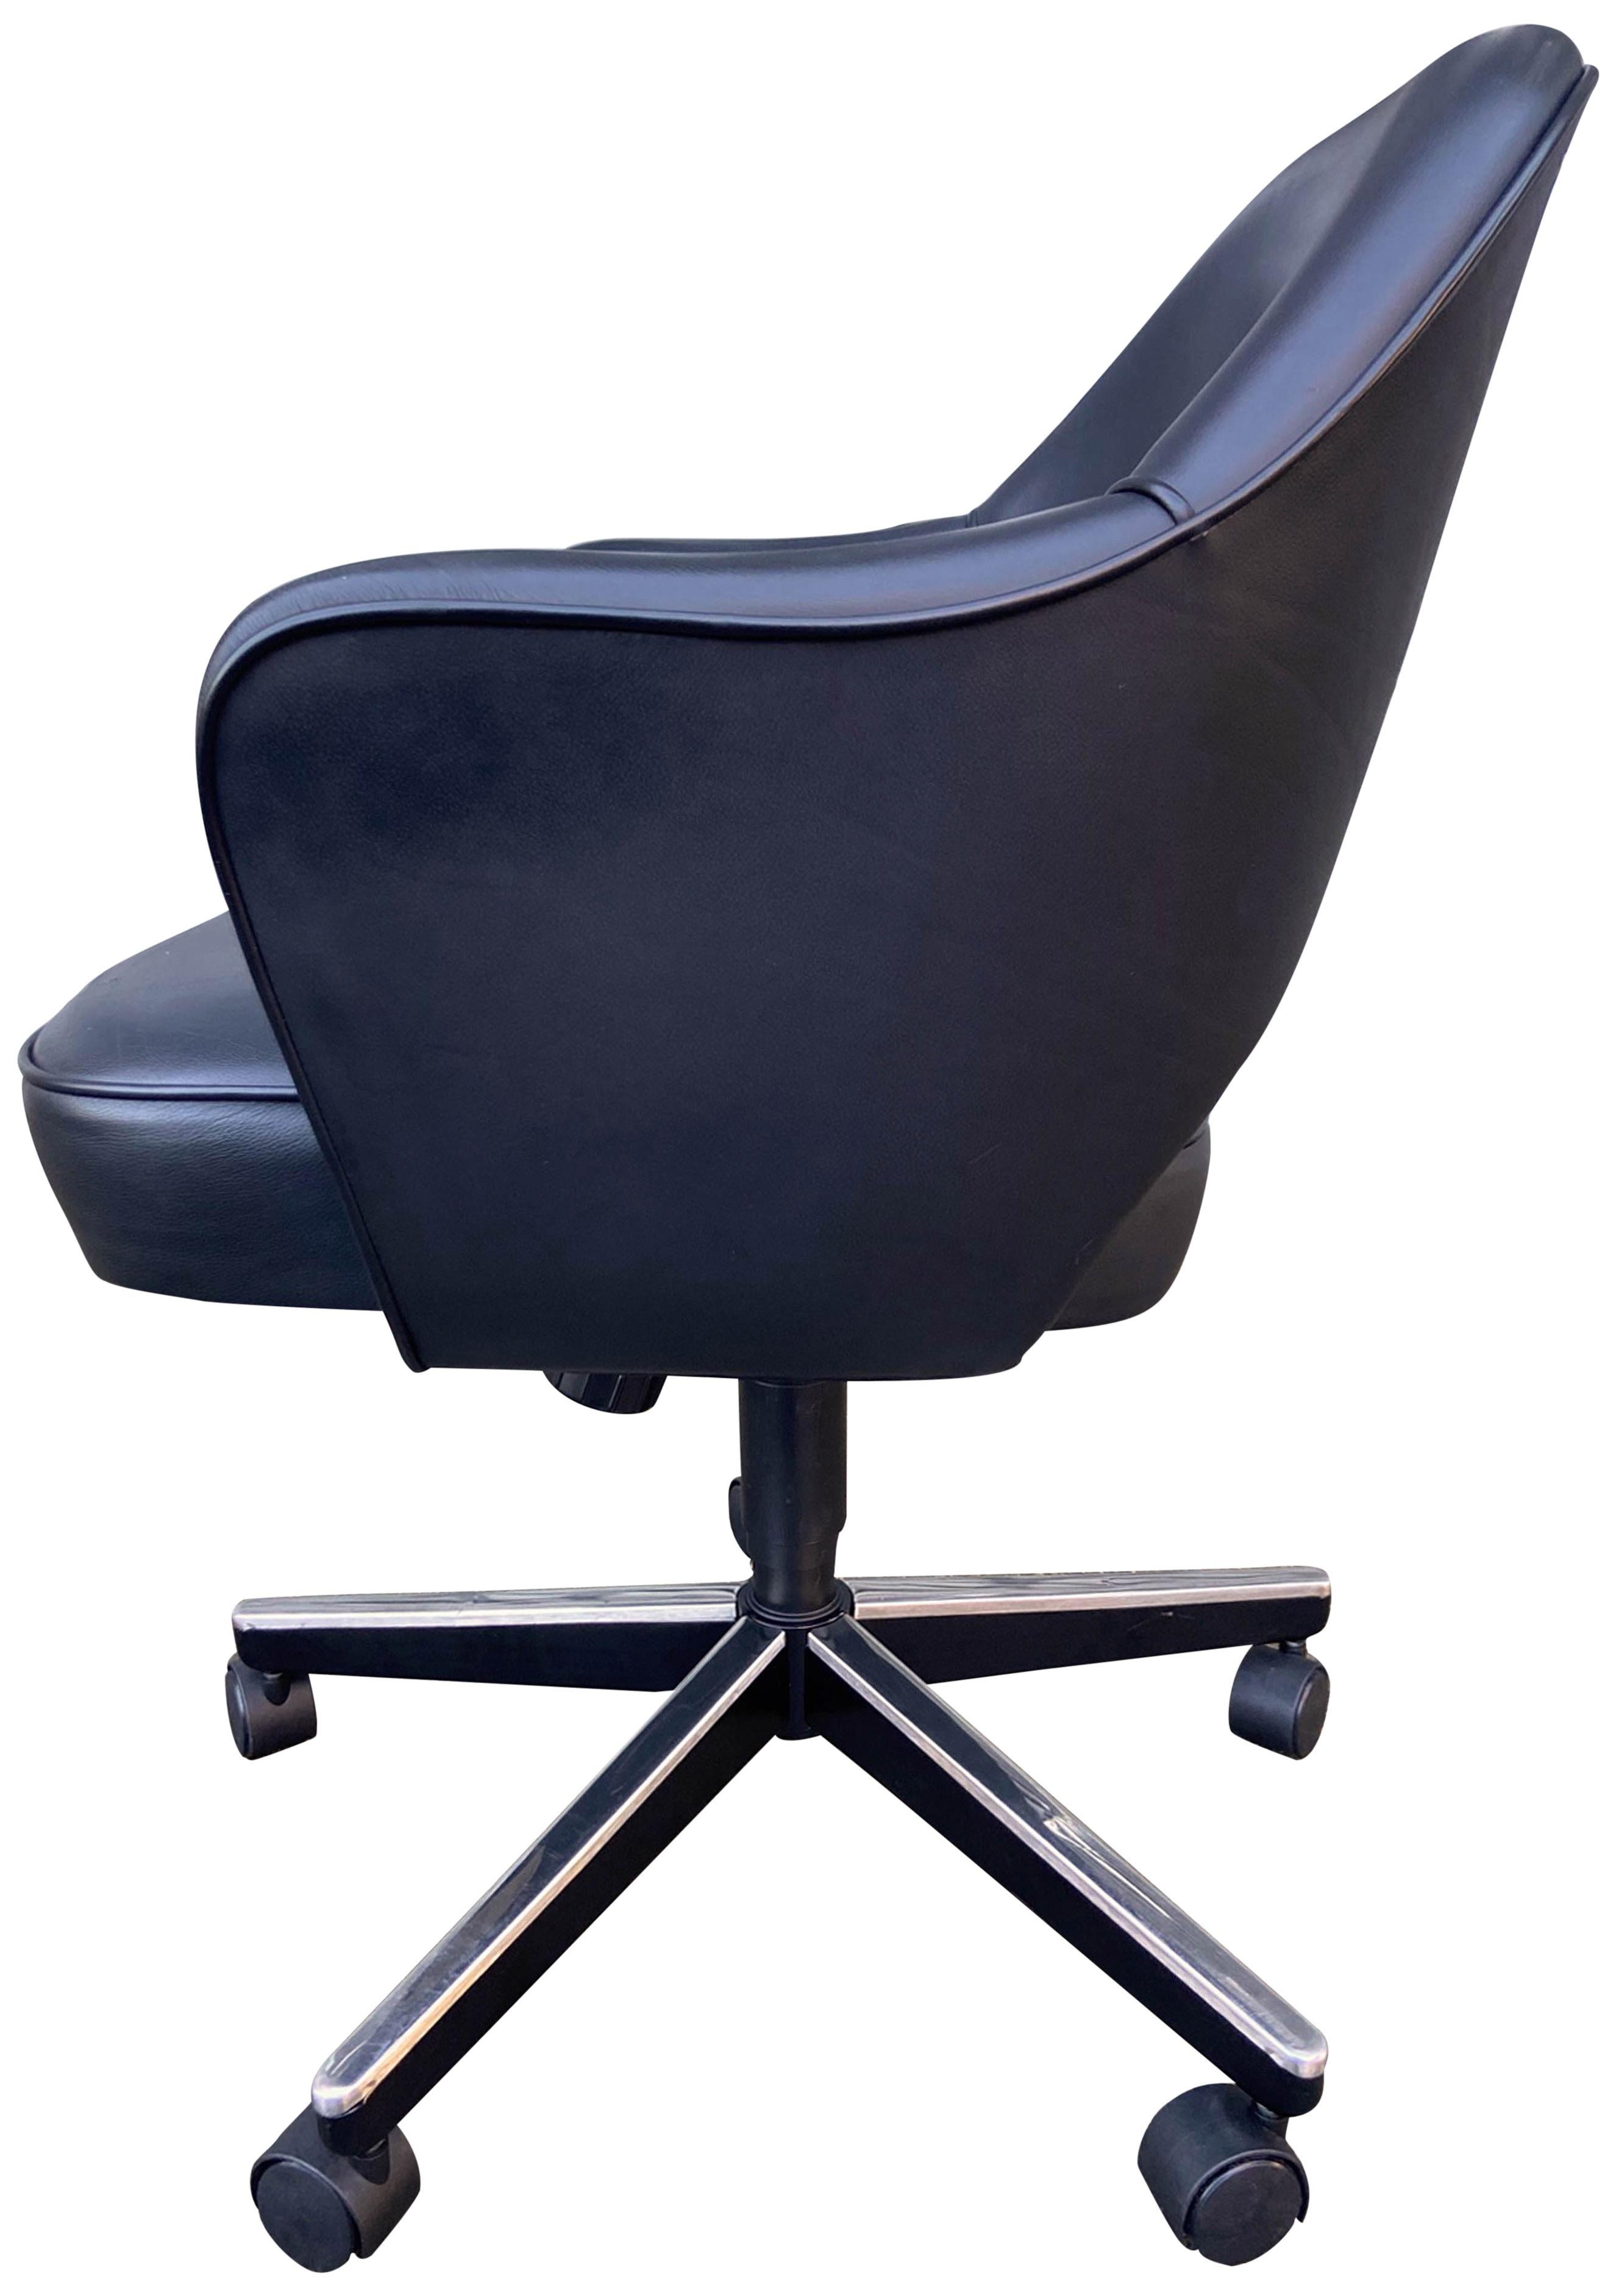 Midcentury Saarinen executive chairs in black leather. All with adjustable manual height and tilt positions. This iconic design has been a favorite in both the home and corporate settings due to its sharp looks and comfort. Seat height adjustable to